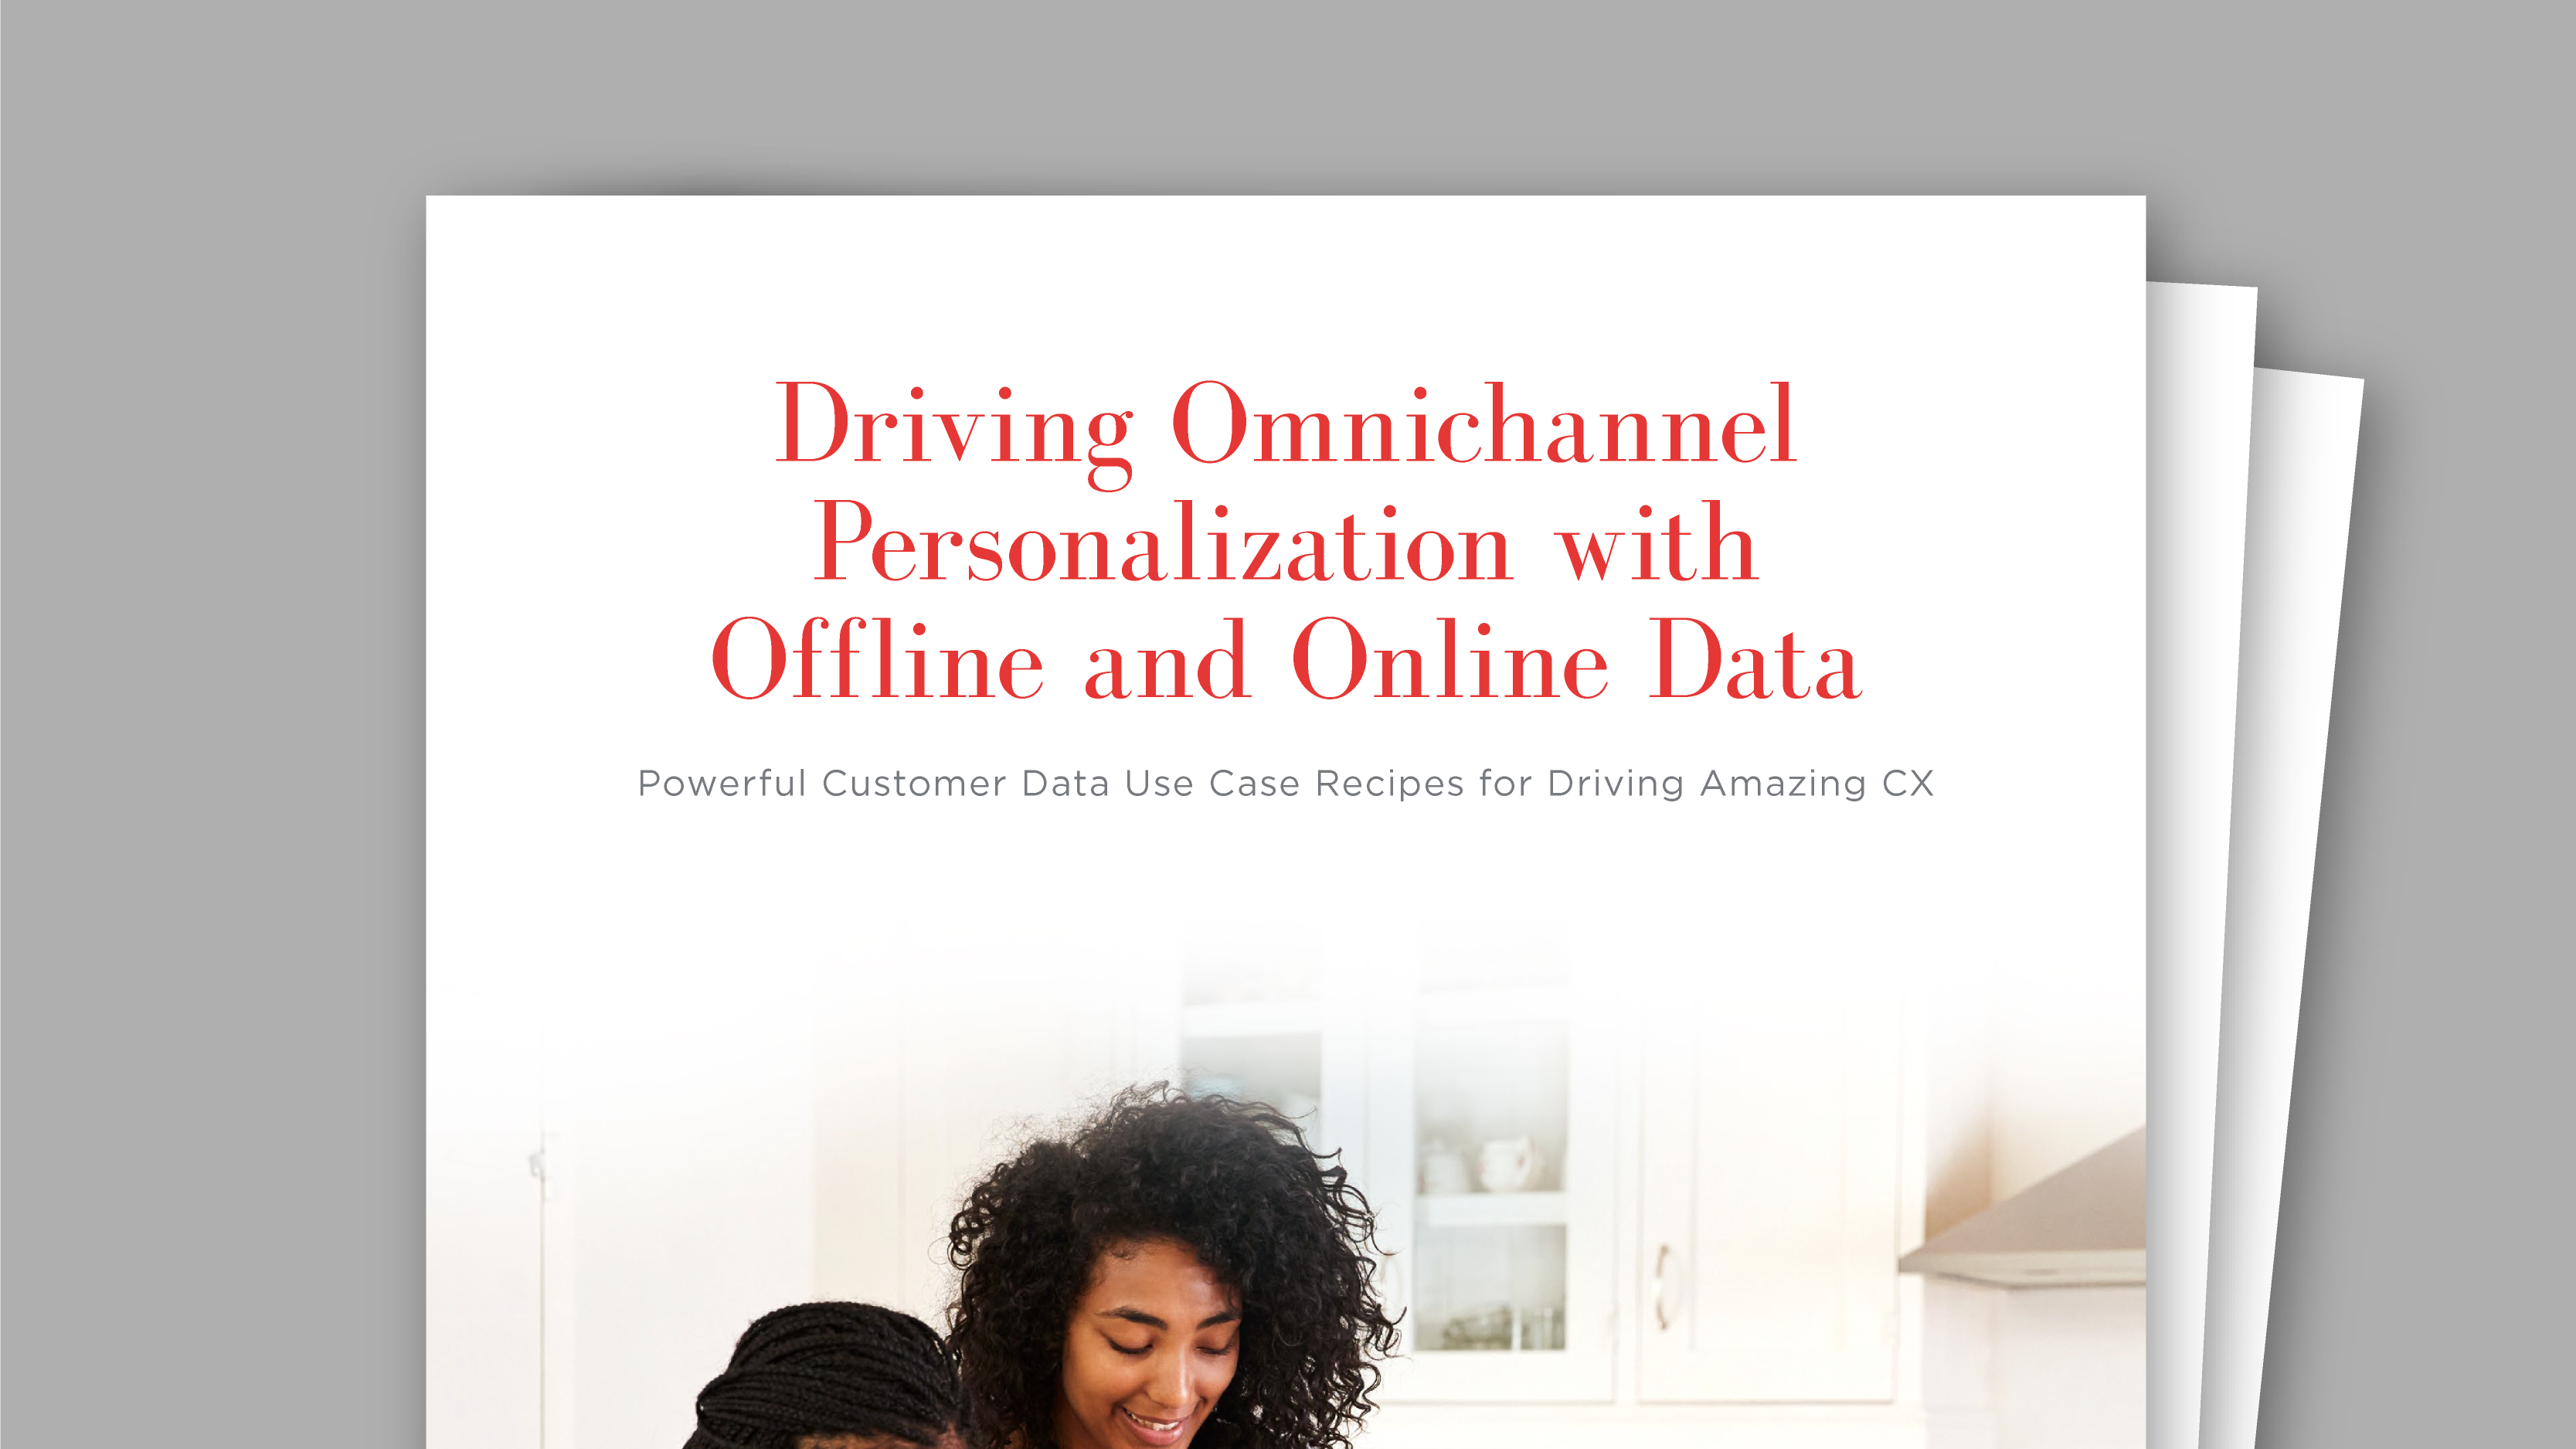 Driving Omnichannel Personalization with Offline and Online Data